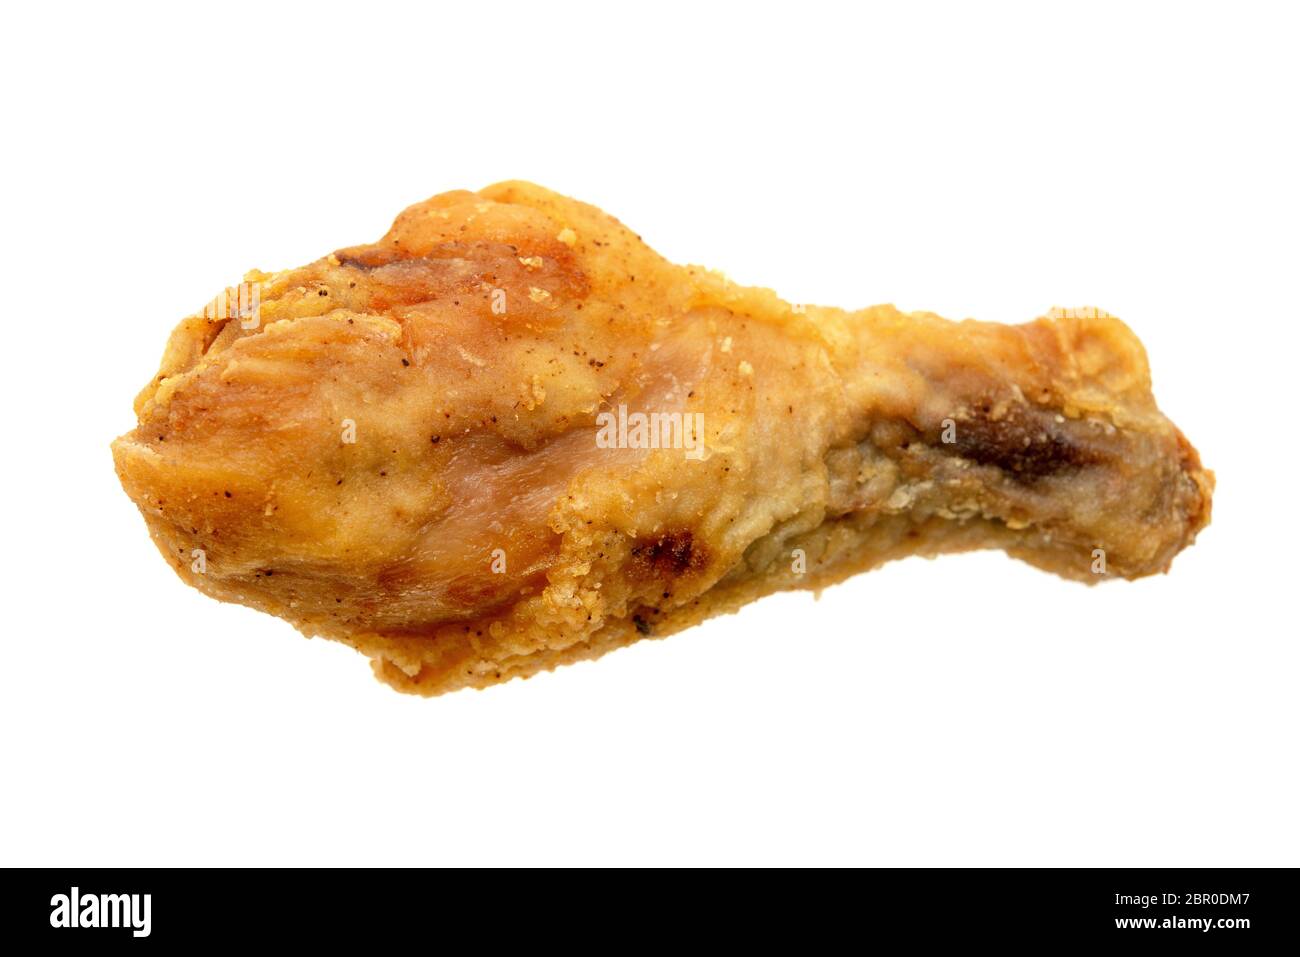 Original recipe fried chicken drumstick, isolated on white background. Stock Photo